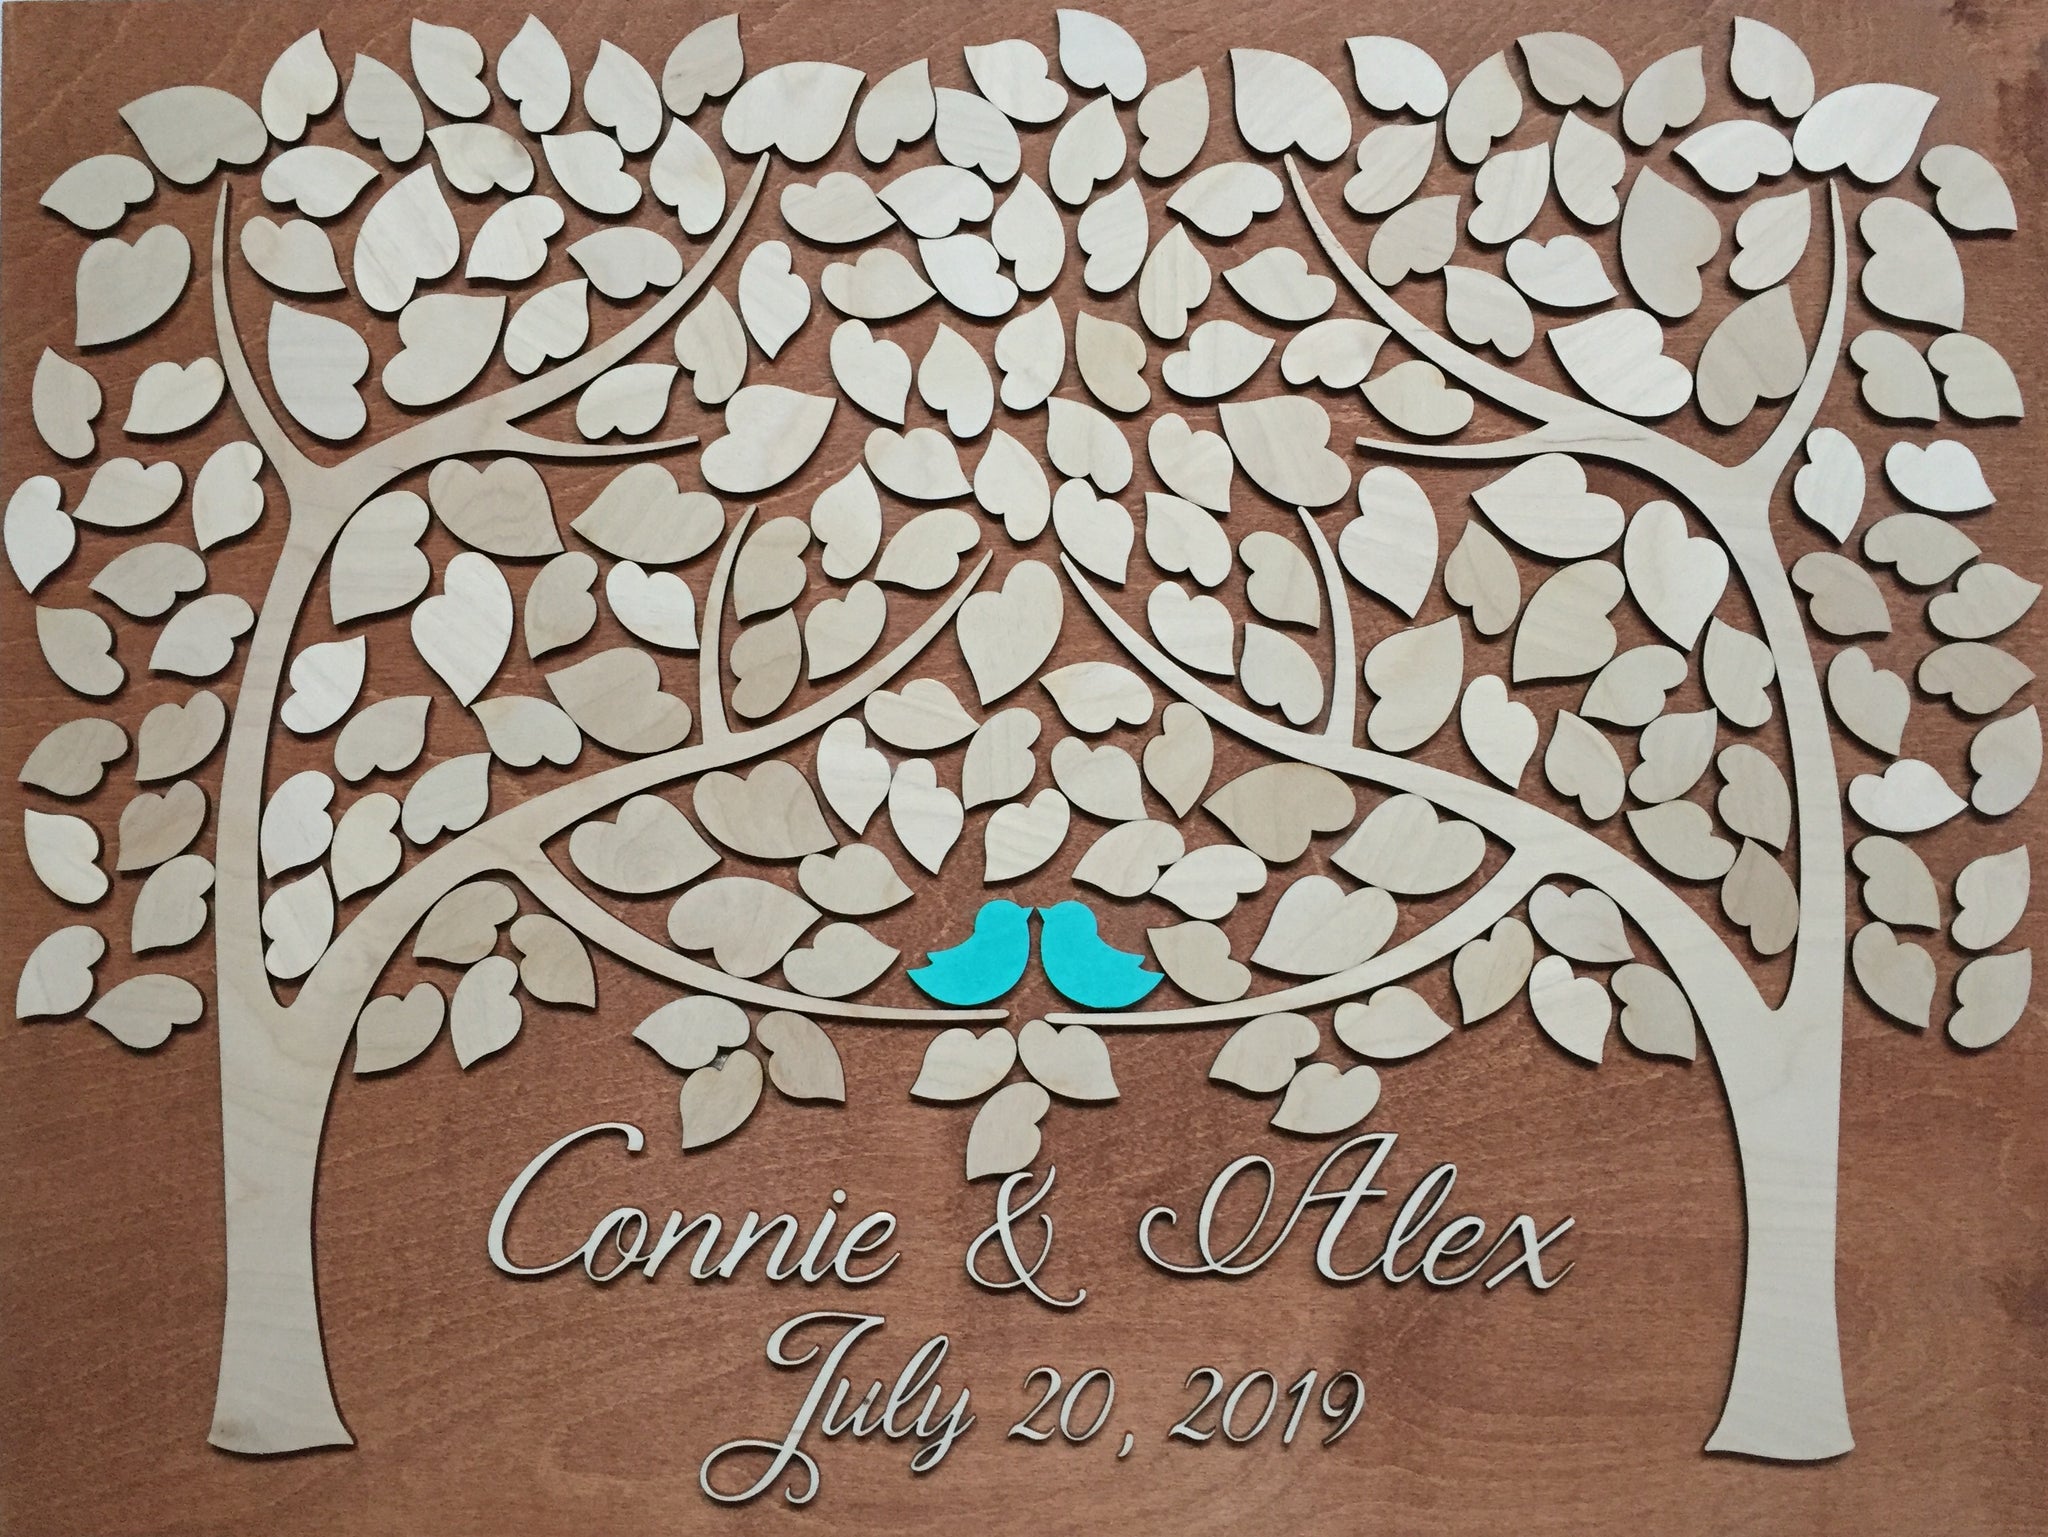 Wedding guest book made of wood representing two family trees that